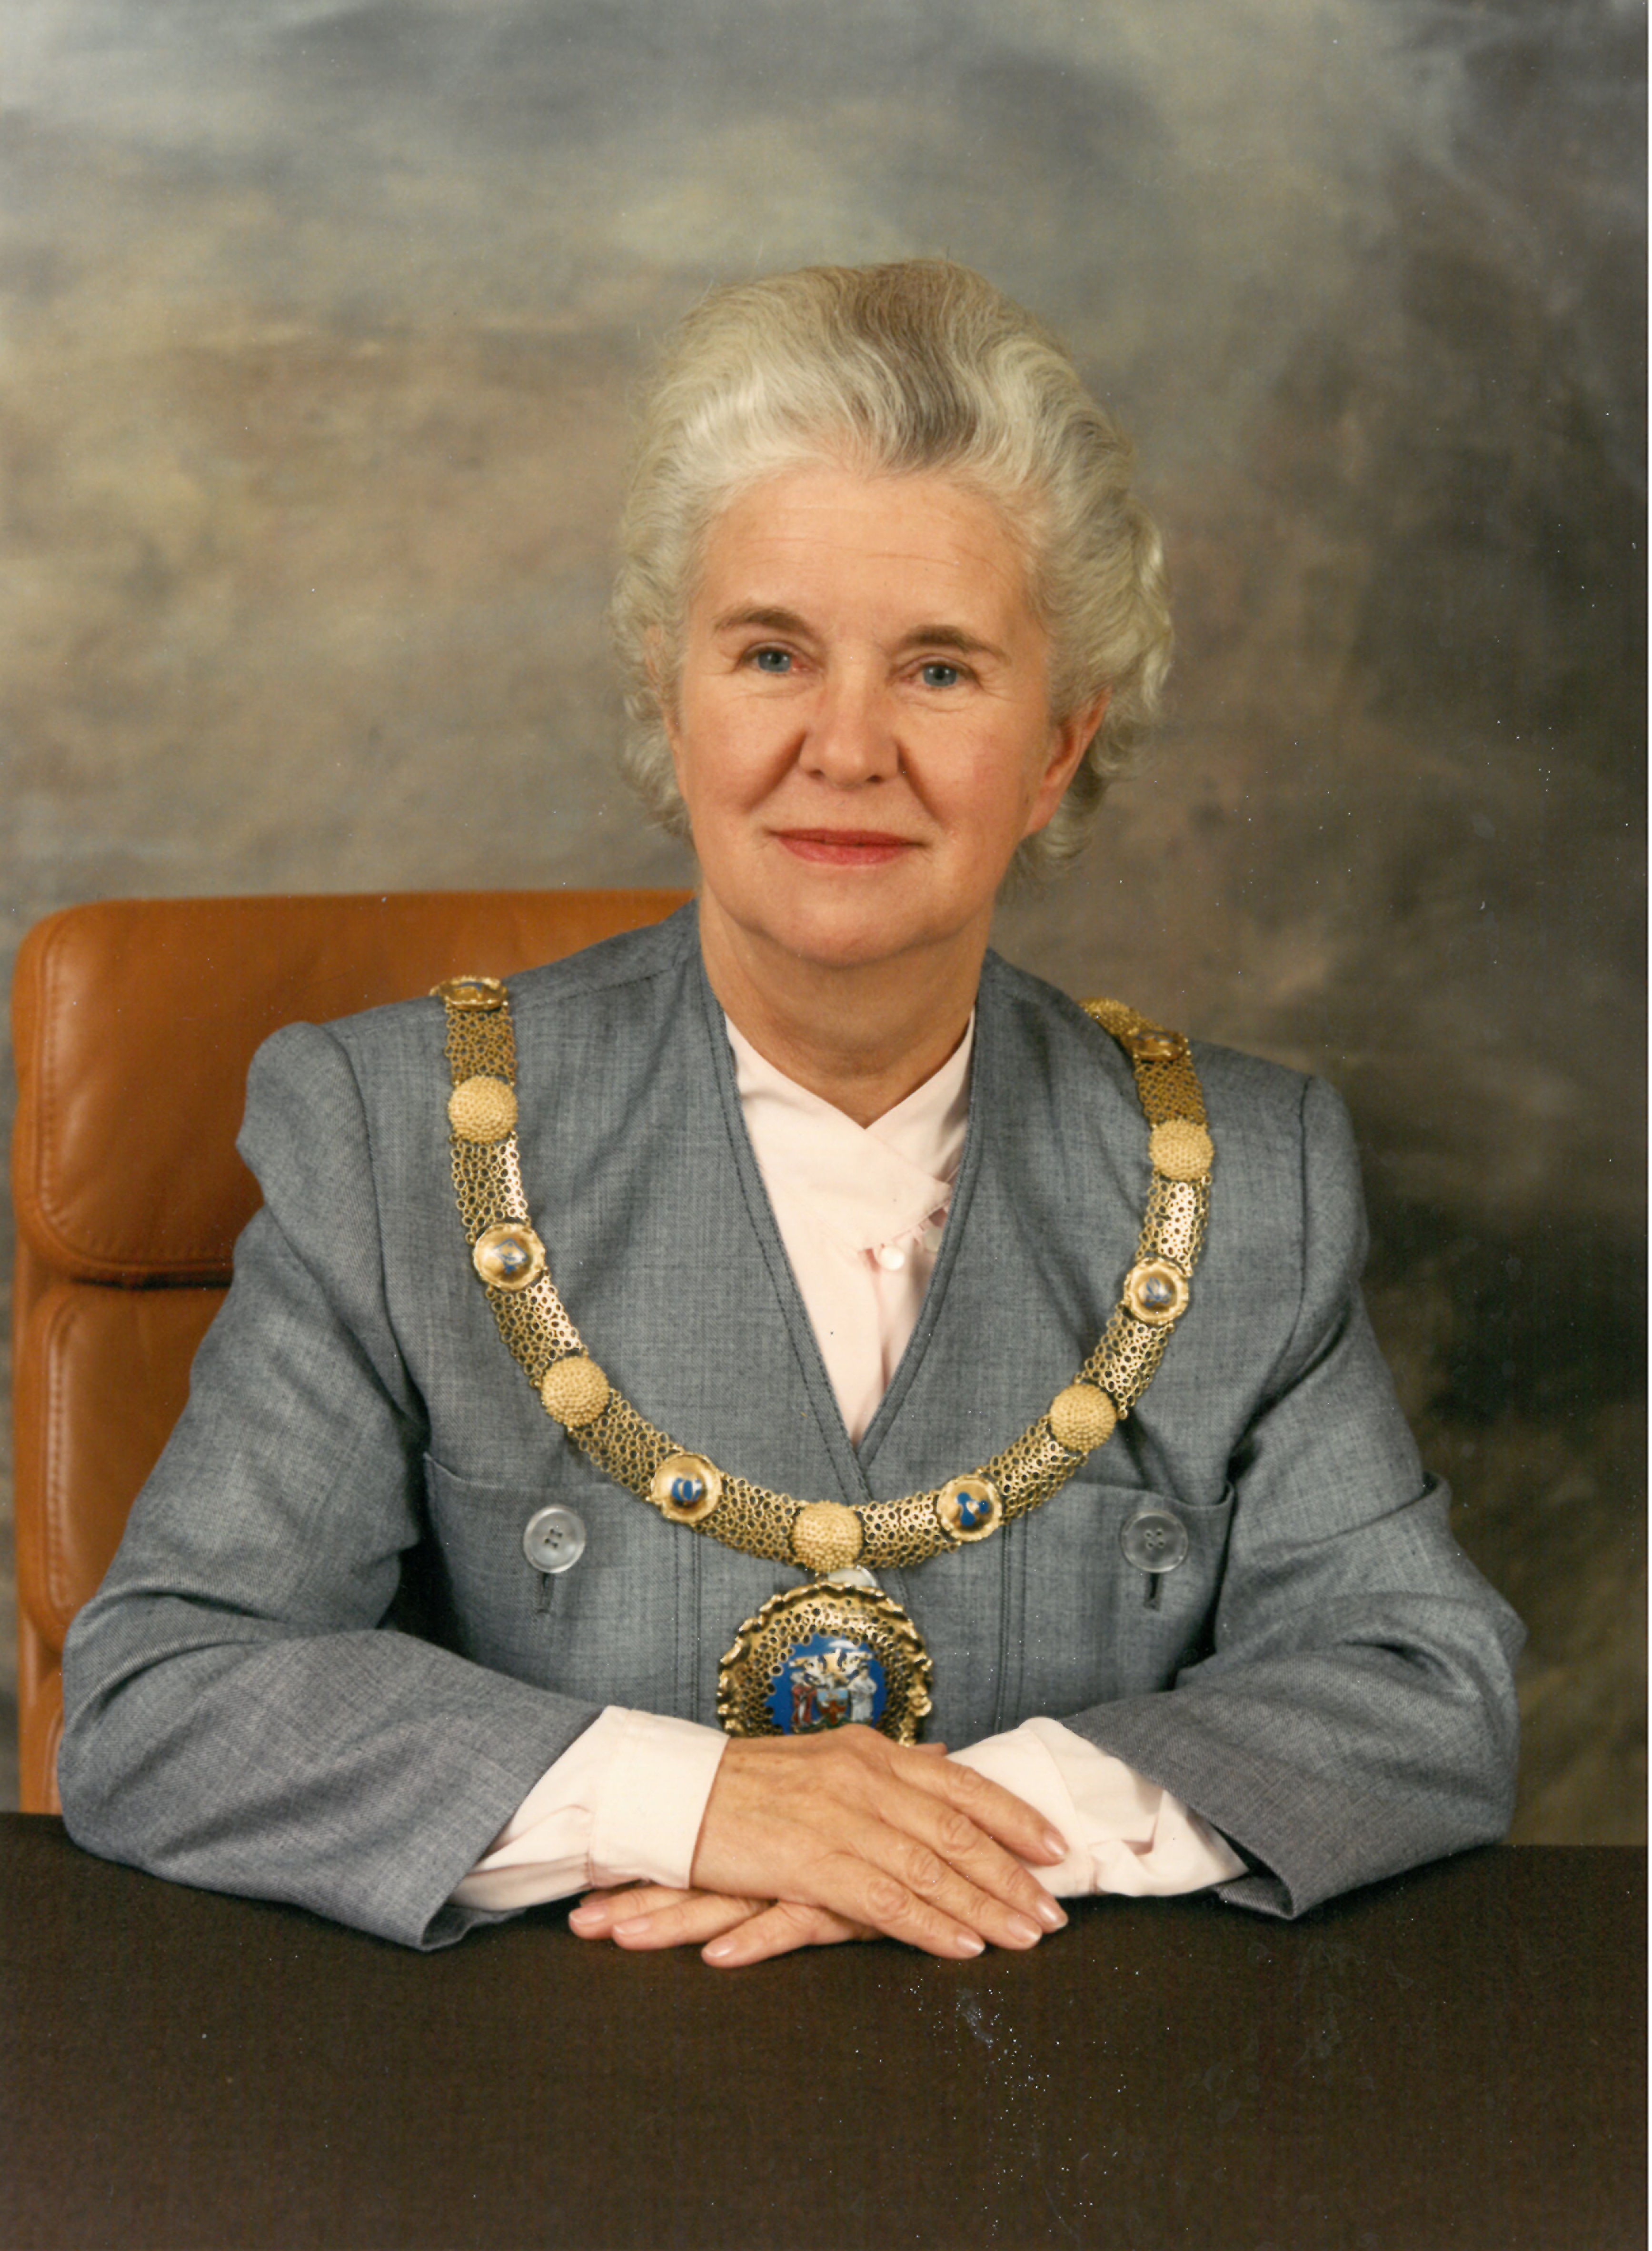 LDRPS:2004.7.13 Marion Rawlings, President of the Royal Pharmaceutical Society, 1989-1990